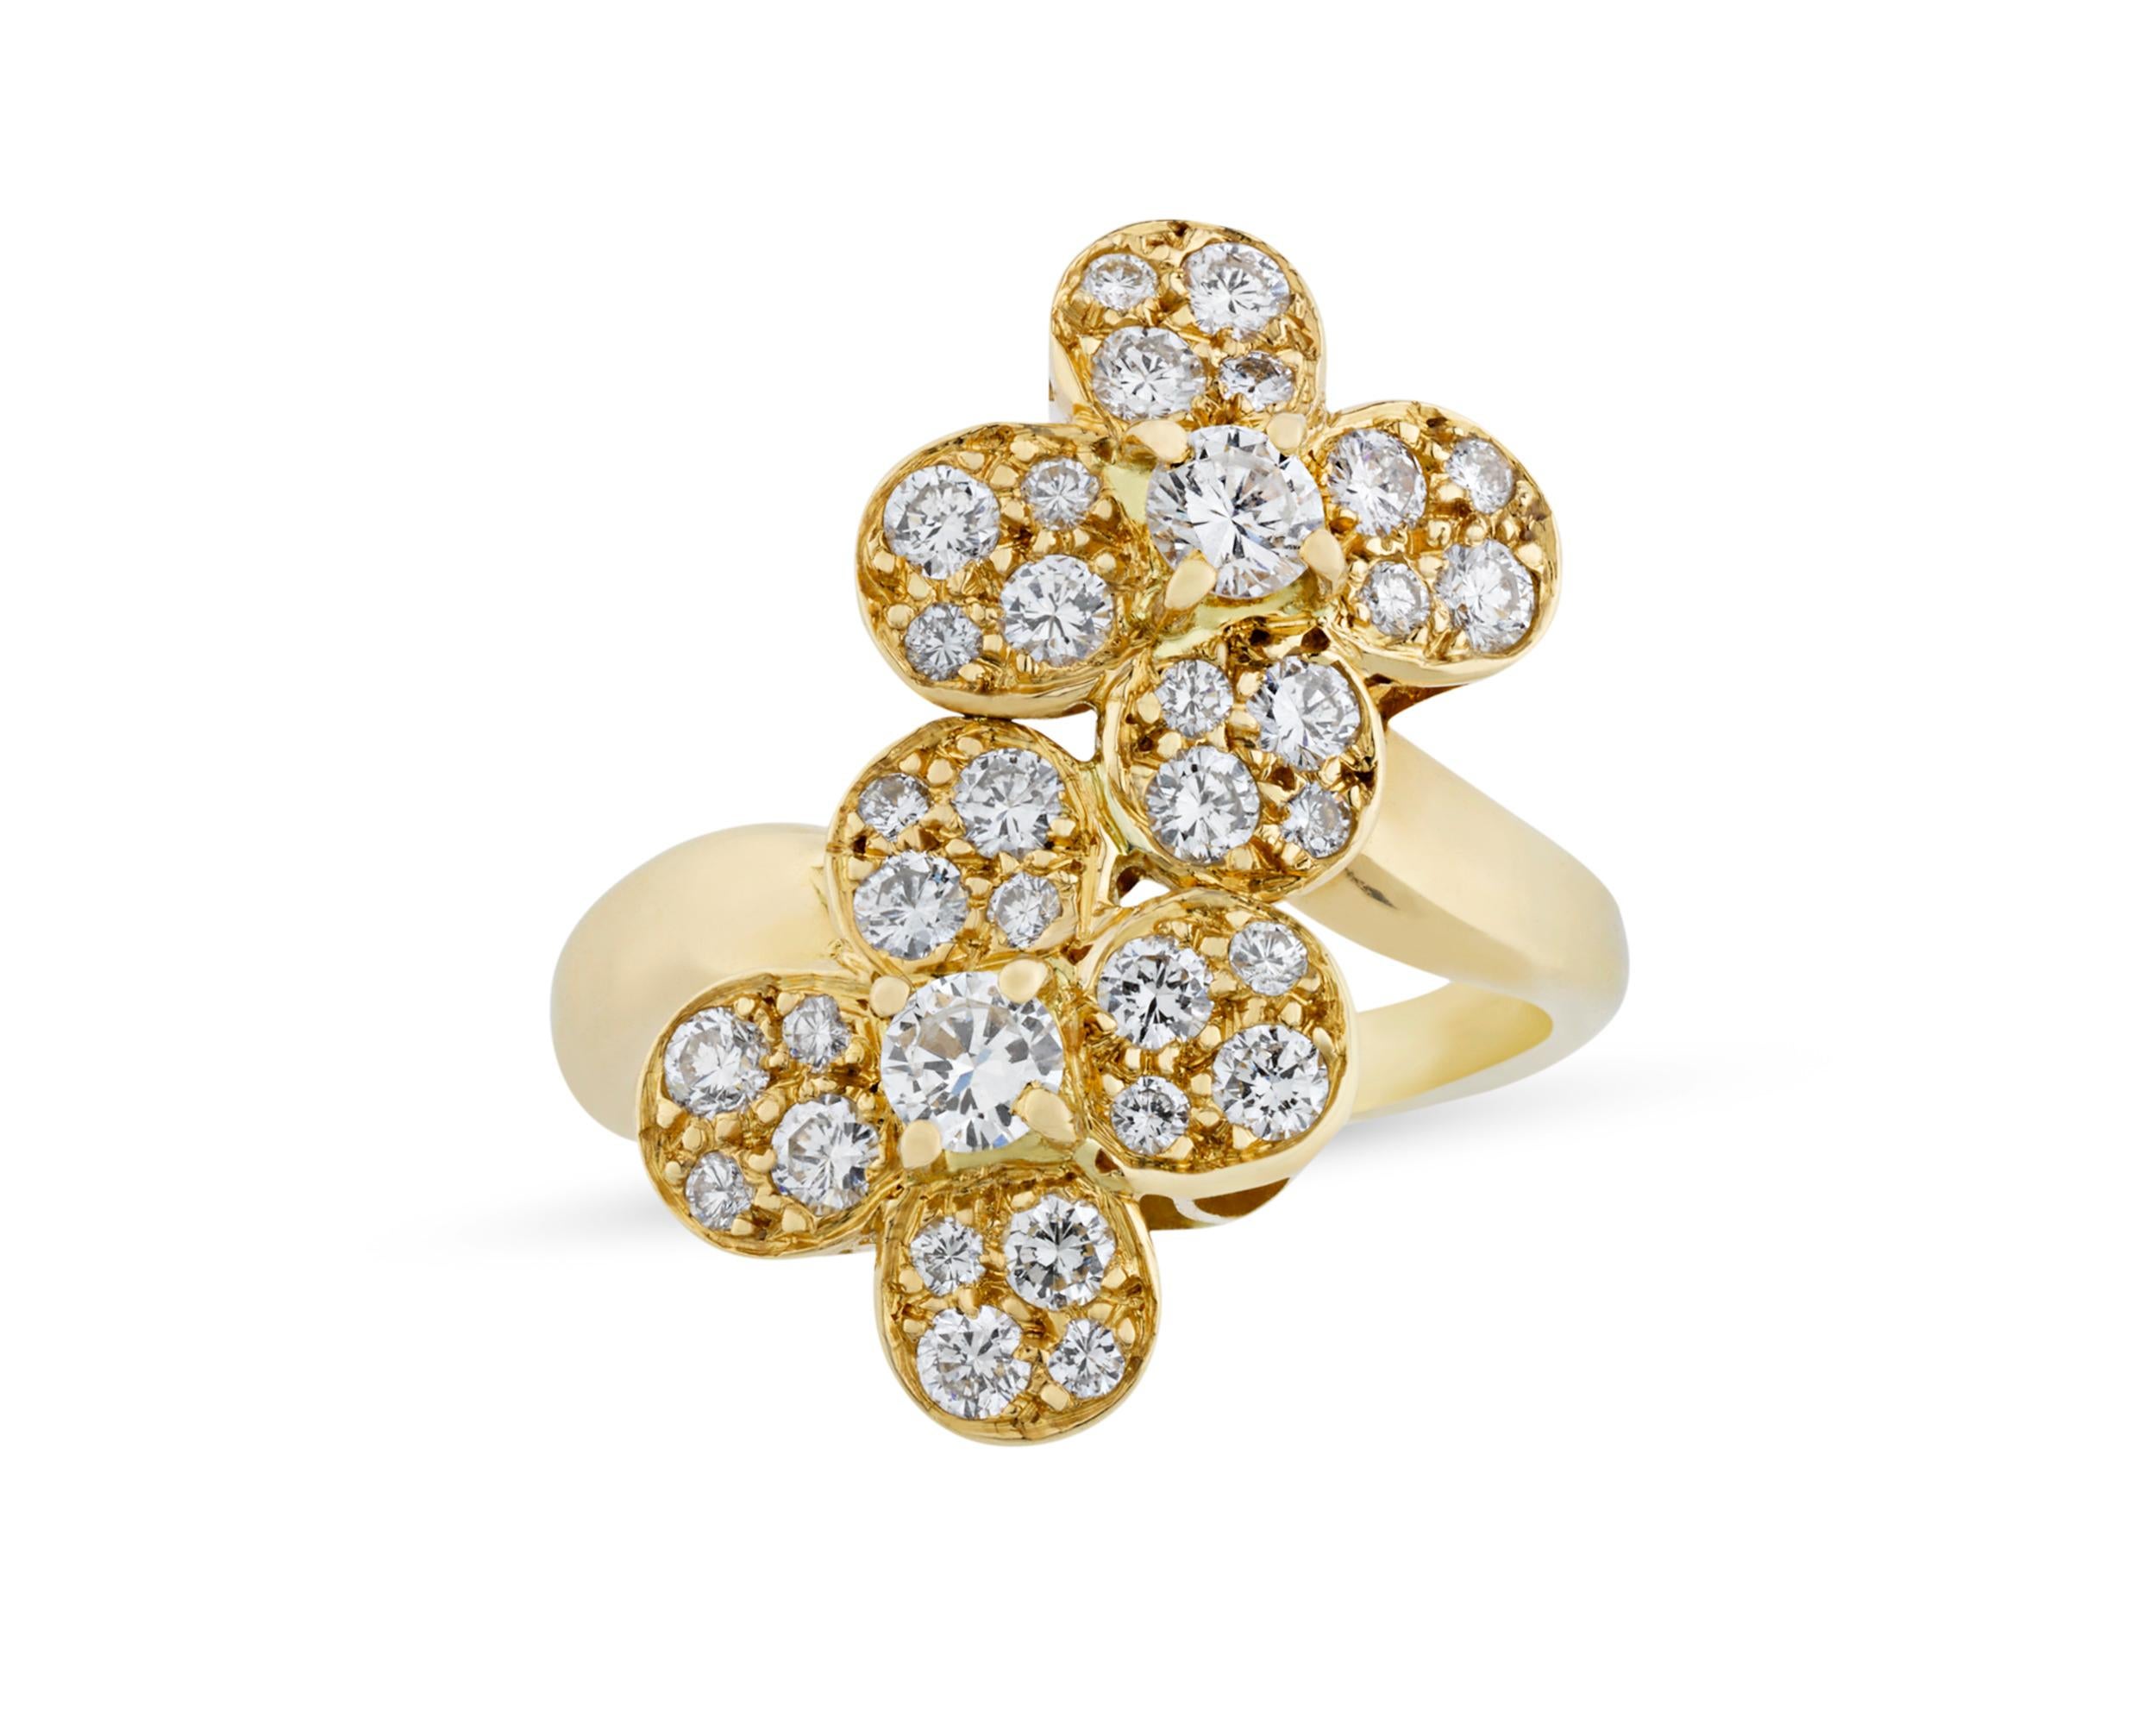 Two interlocking 18K yellow gold flowers encrusted in brilliant-cut round white diamonds bloom in this ring by Van Cleef & Arpels. The diamonds weigh a total of 1.01 carats and display highly desirable D-F color and VVSI-VVS2 clarity. One of the